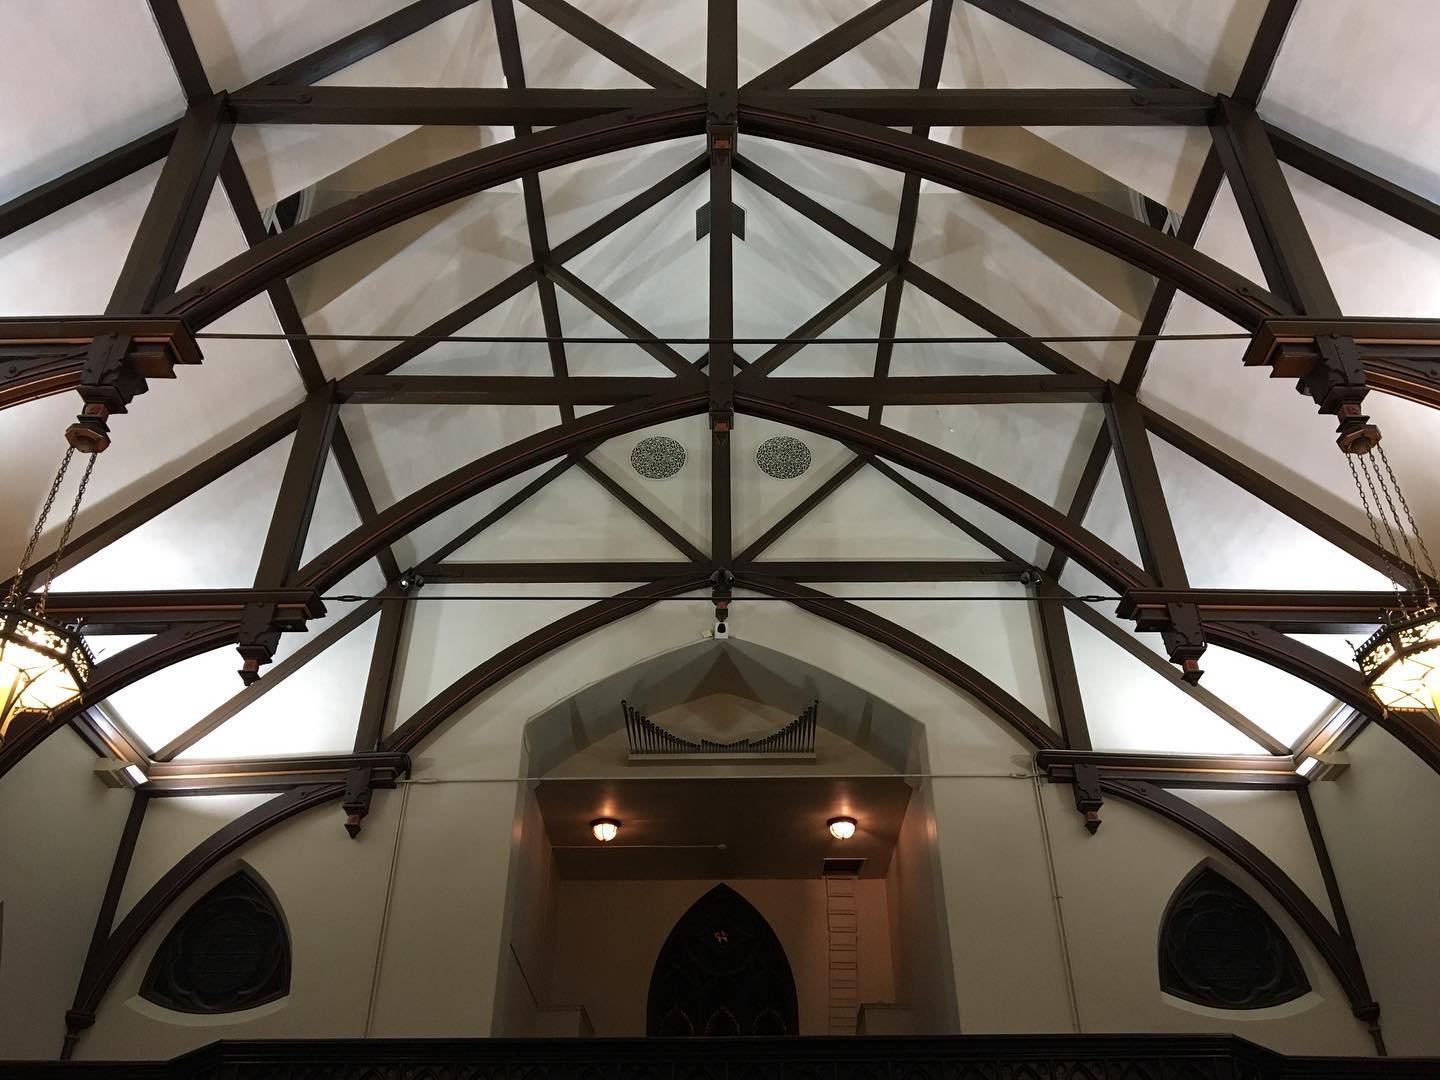 #tbt to venue hunting for concerts past (which also happened today for our June concert!! so #WatchThisSpace for an announcement on that soon!) and the gorgeous vaults of DC area churches. 

Can&rsquo;t you just hear the ringing finally chord in this